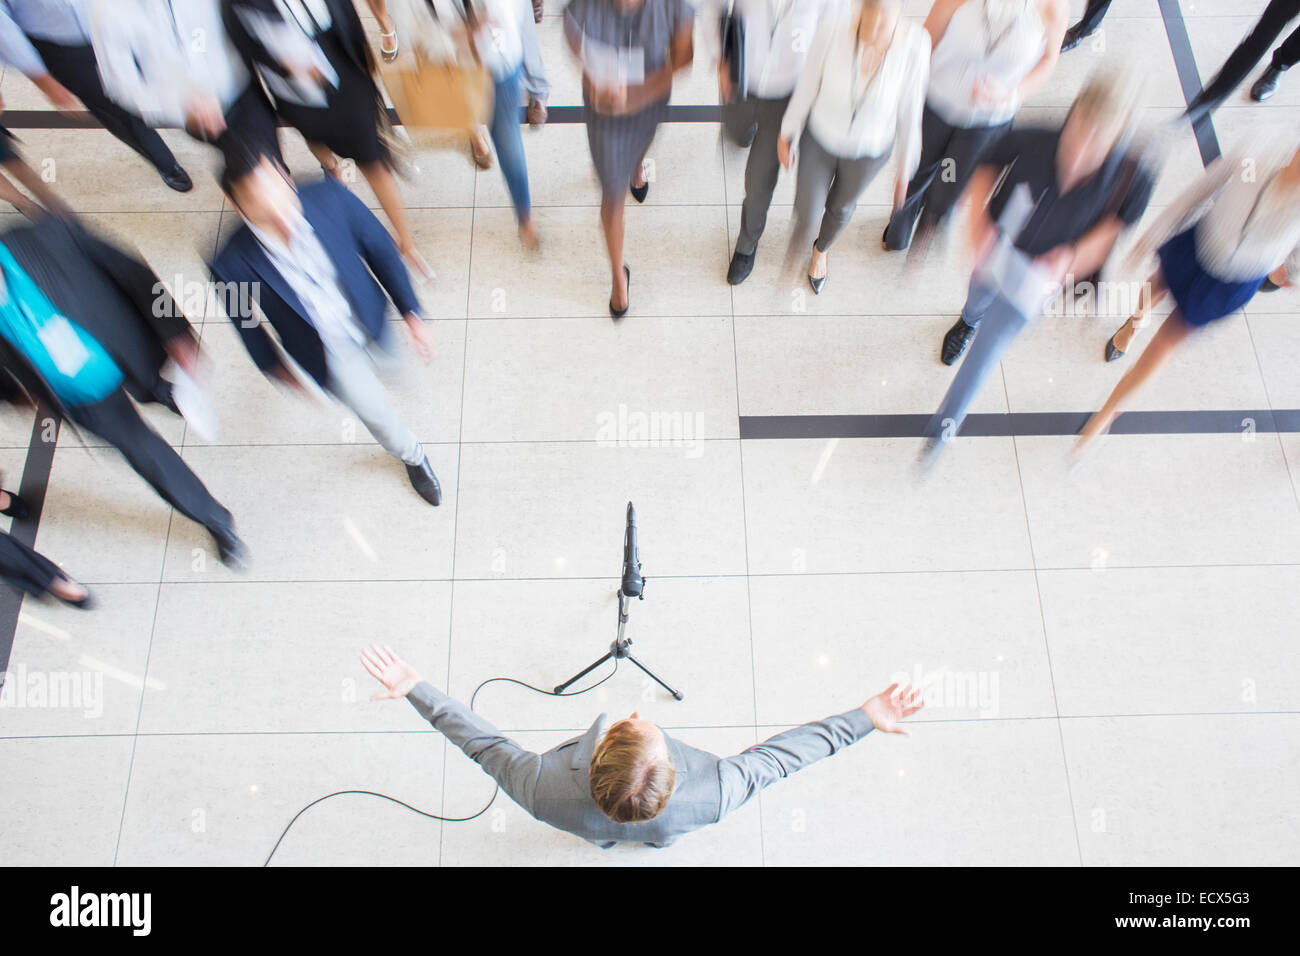 High angle view of business people walking towards colleague giving speech Stock Photo